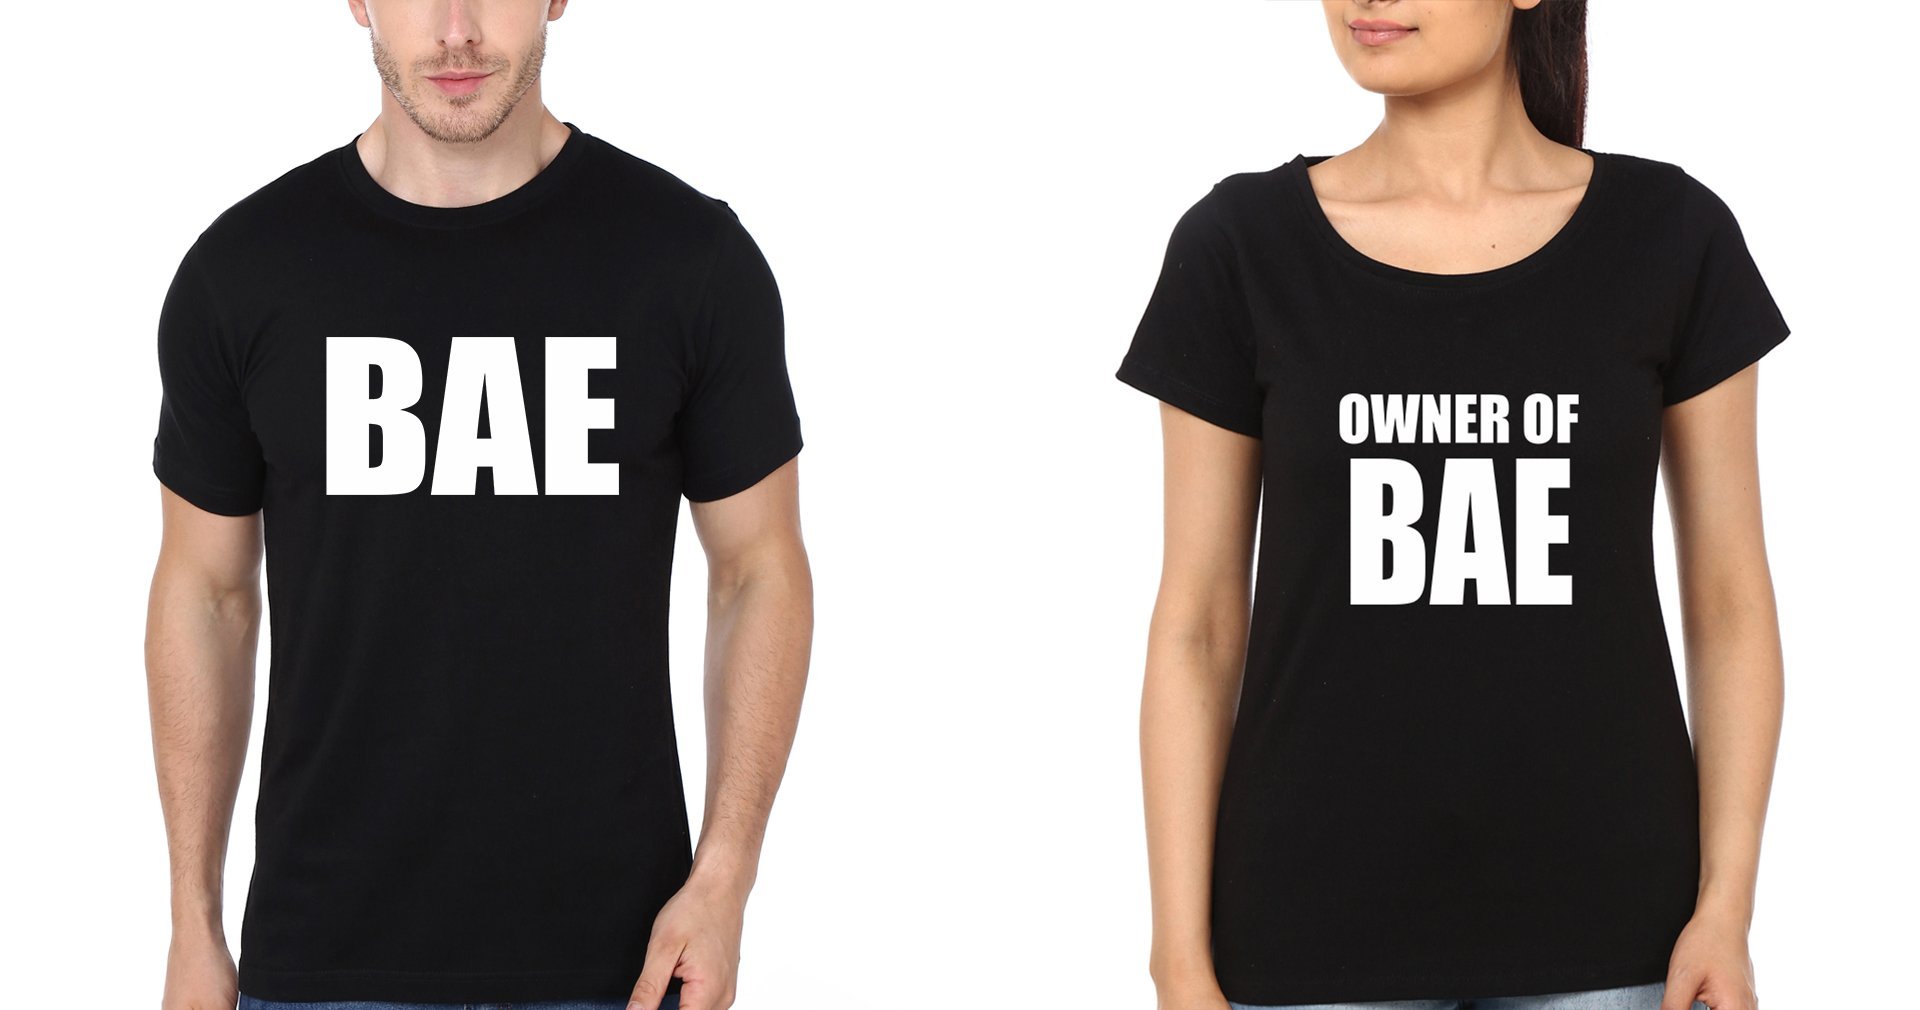 BAE&Owner of BAE Couple Half Sleeves T-Shirts -FunkyTradition - FunkyTradition